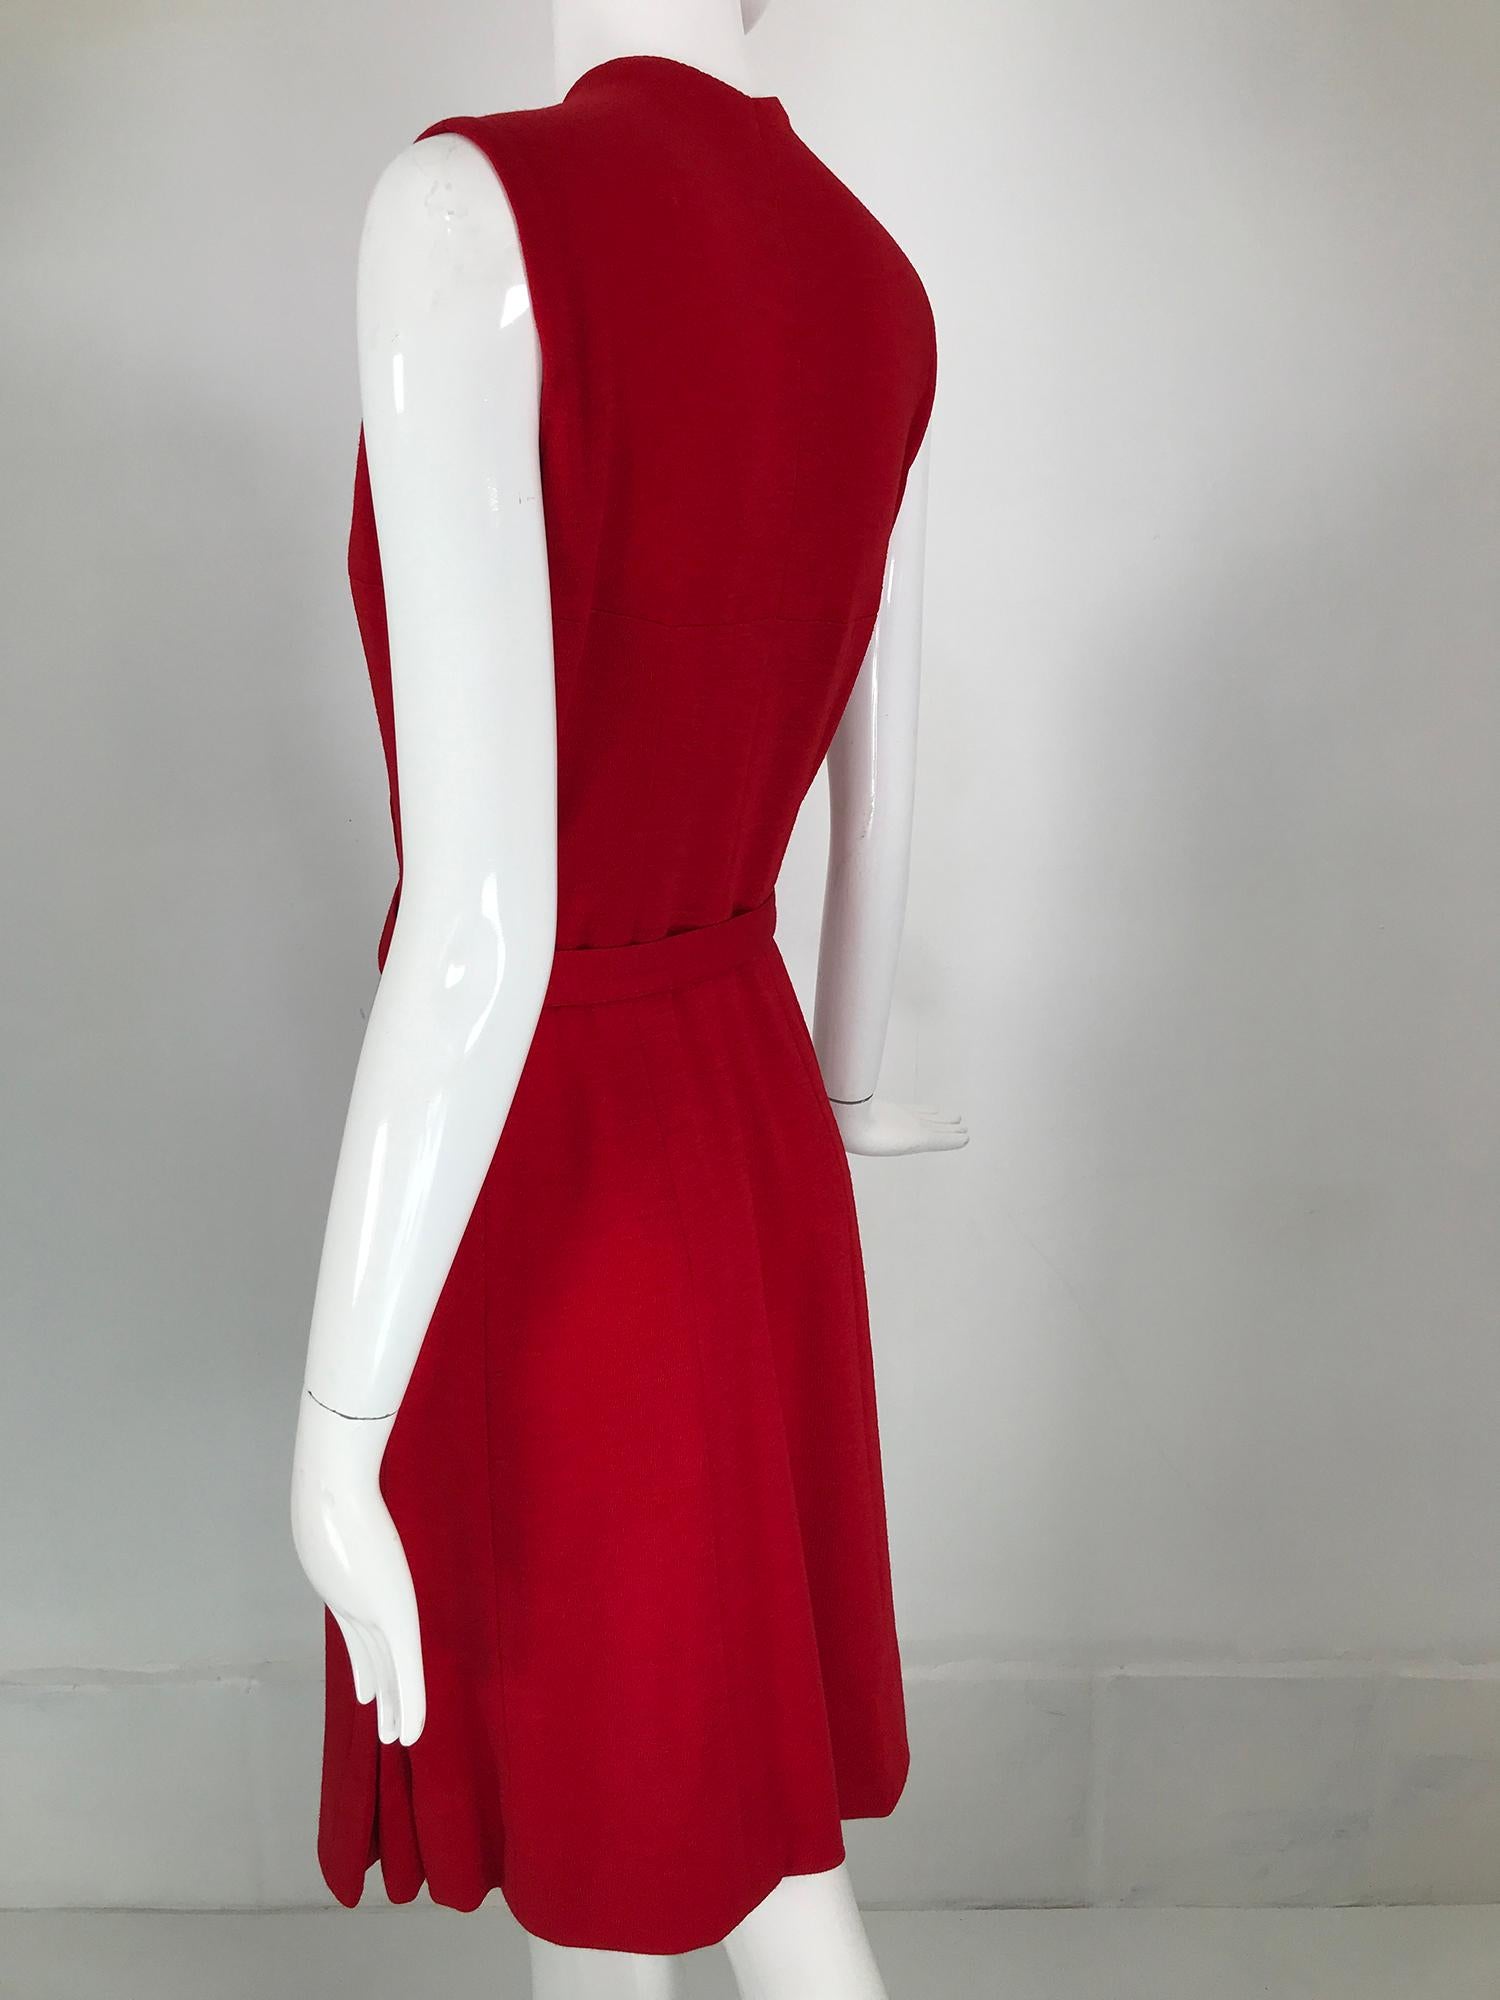 Coco Chanel Red Haute Couture 1950s 2 pc Wool Jersey Jewel Button Dress & Coat  For Sale 7